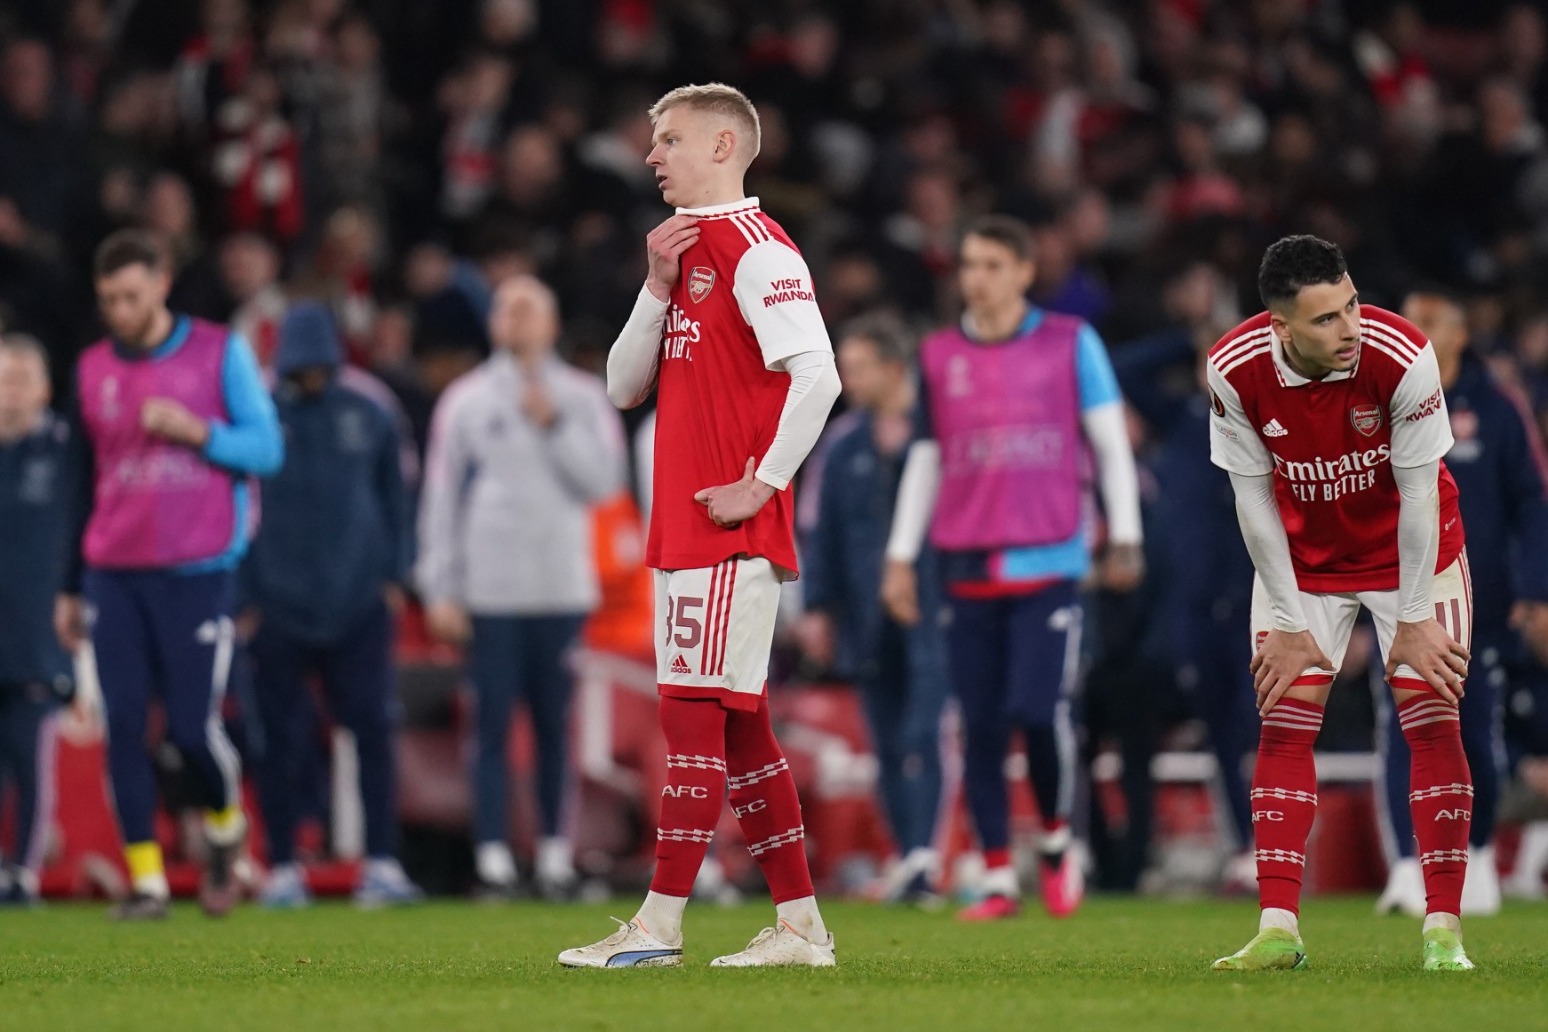 Arsenal out of Europa League after penalty shootout loss to Sporting Lisbon 